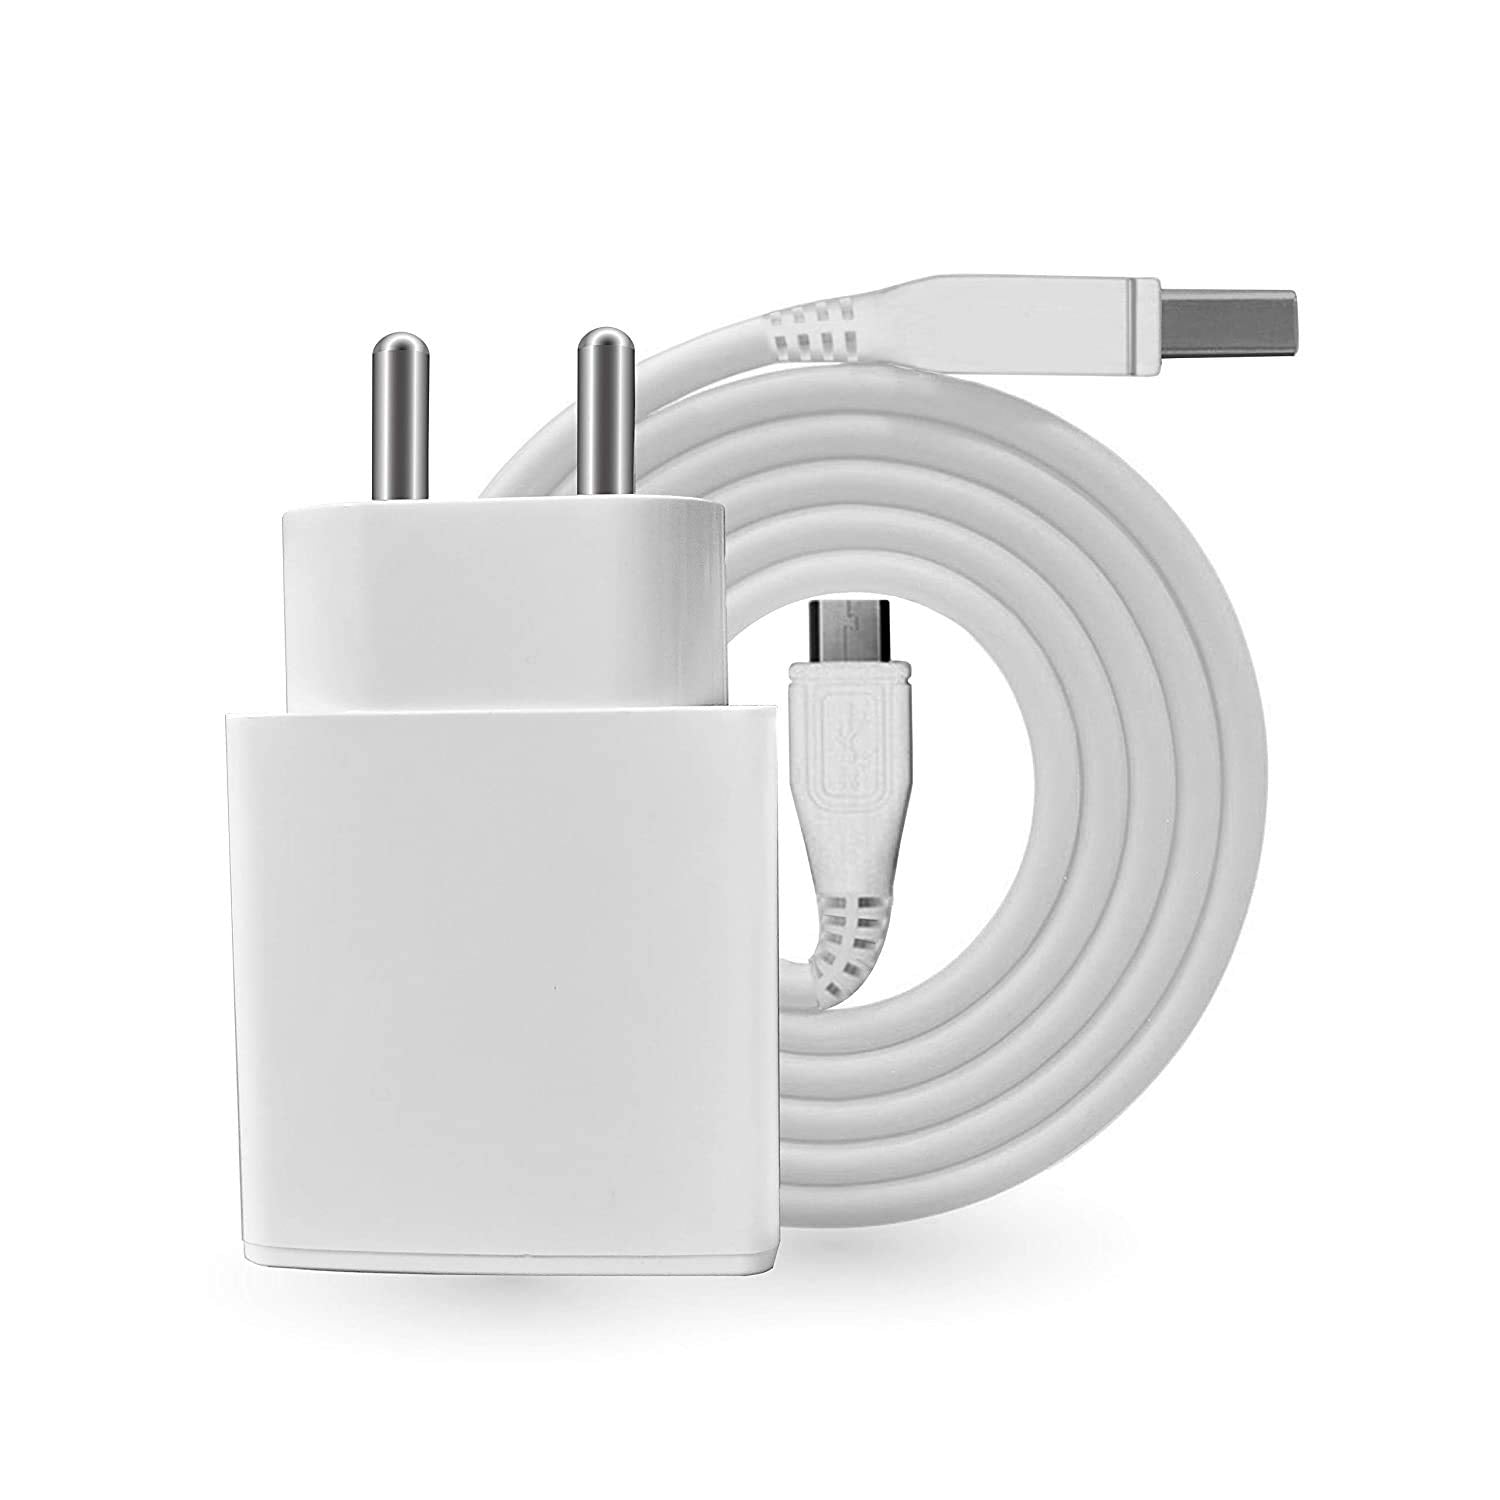 Vivo Y81i 2 Amp Fast Mobile Charger with Cable